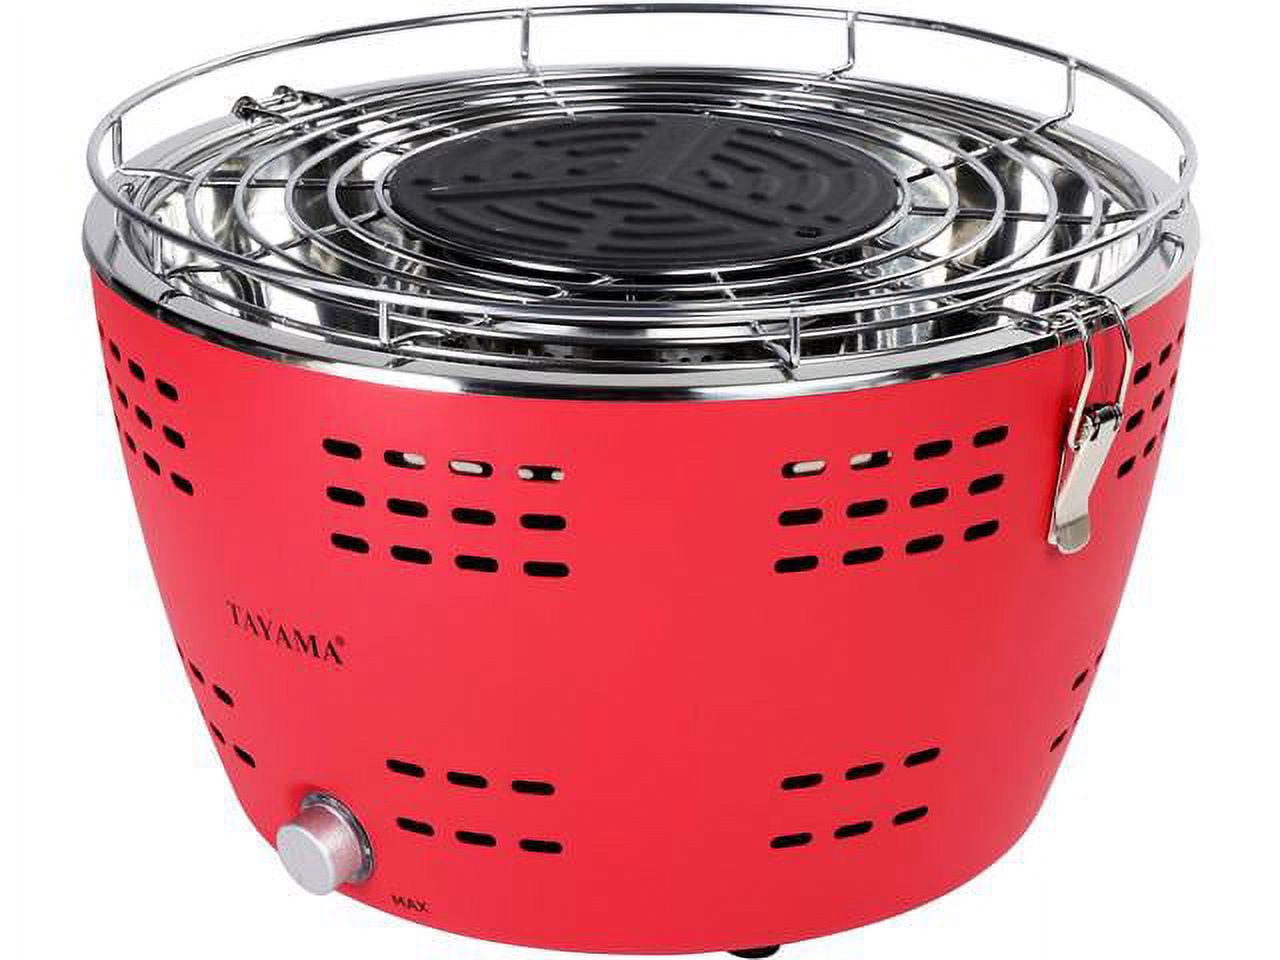 Tayama Portable Charcoal Grill in Red - image 1 of 8